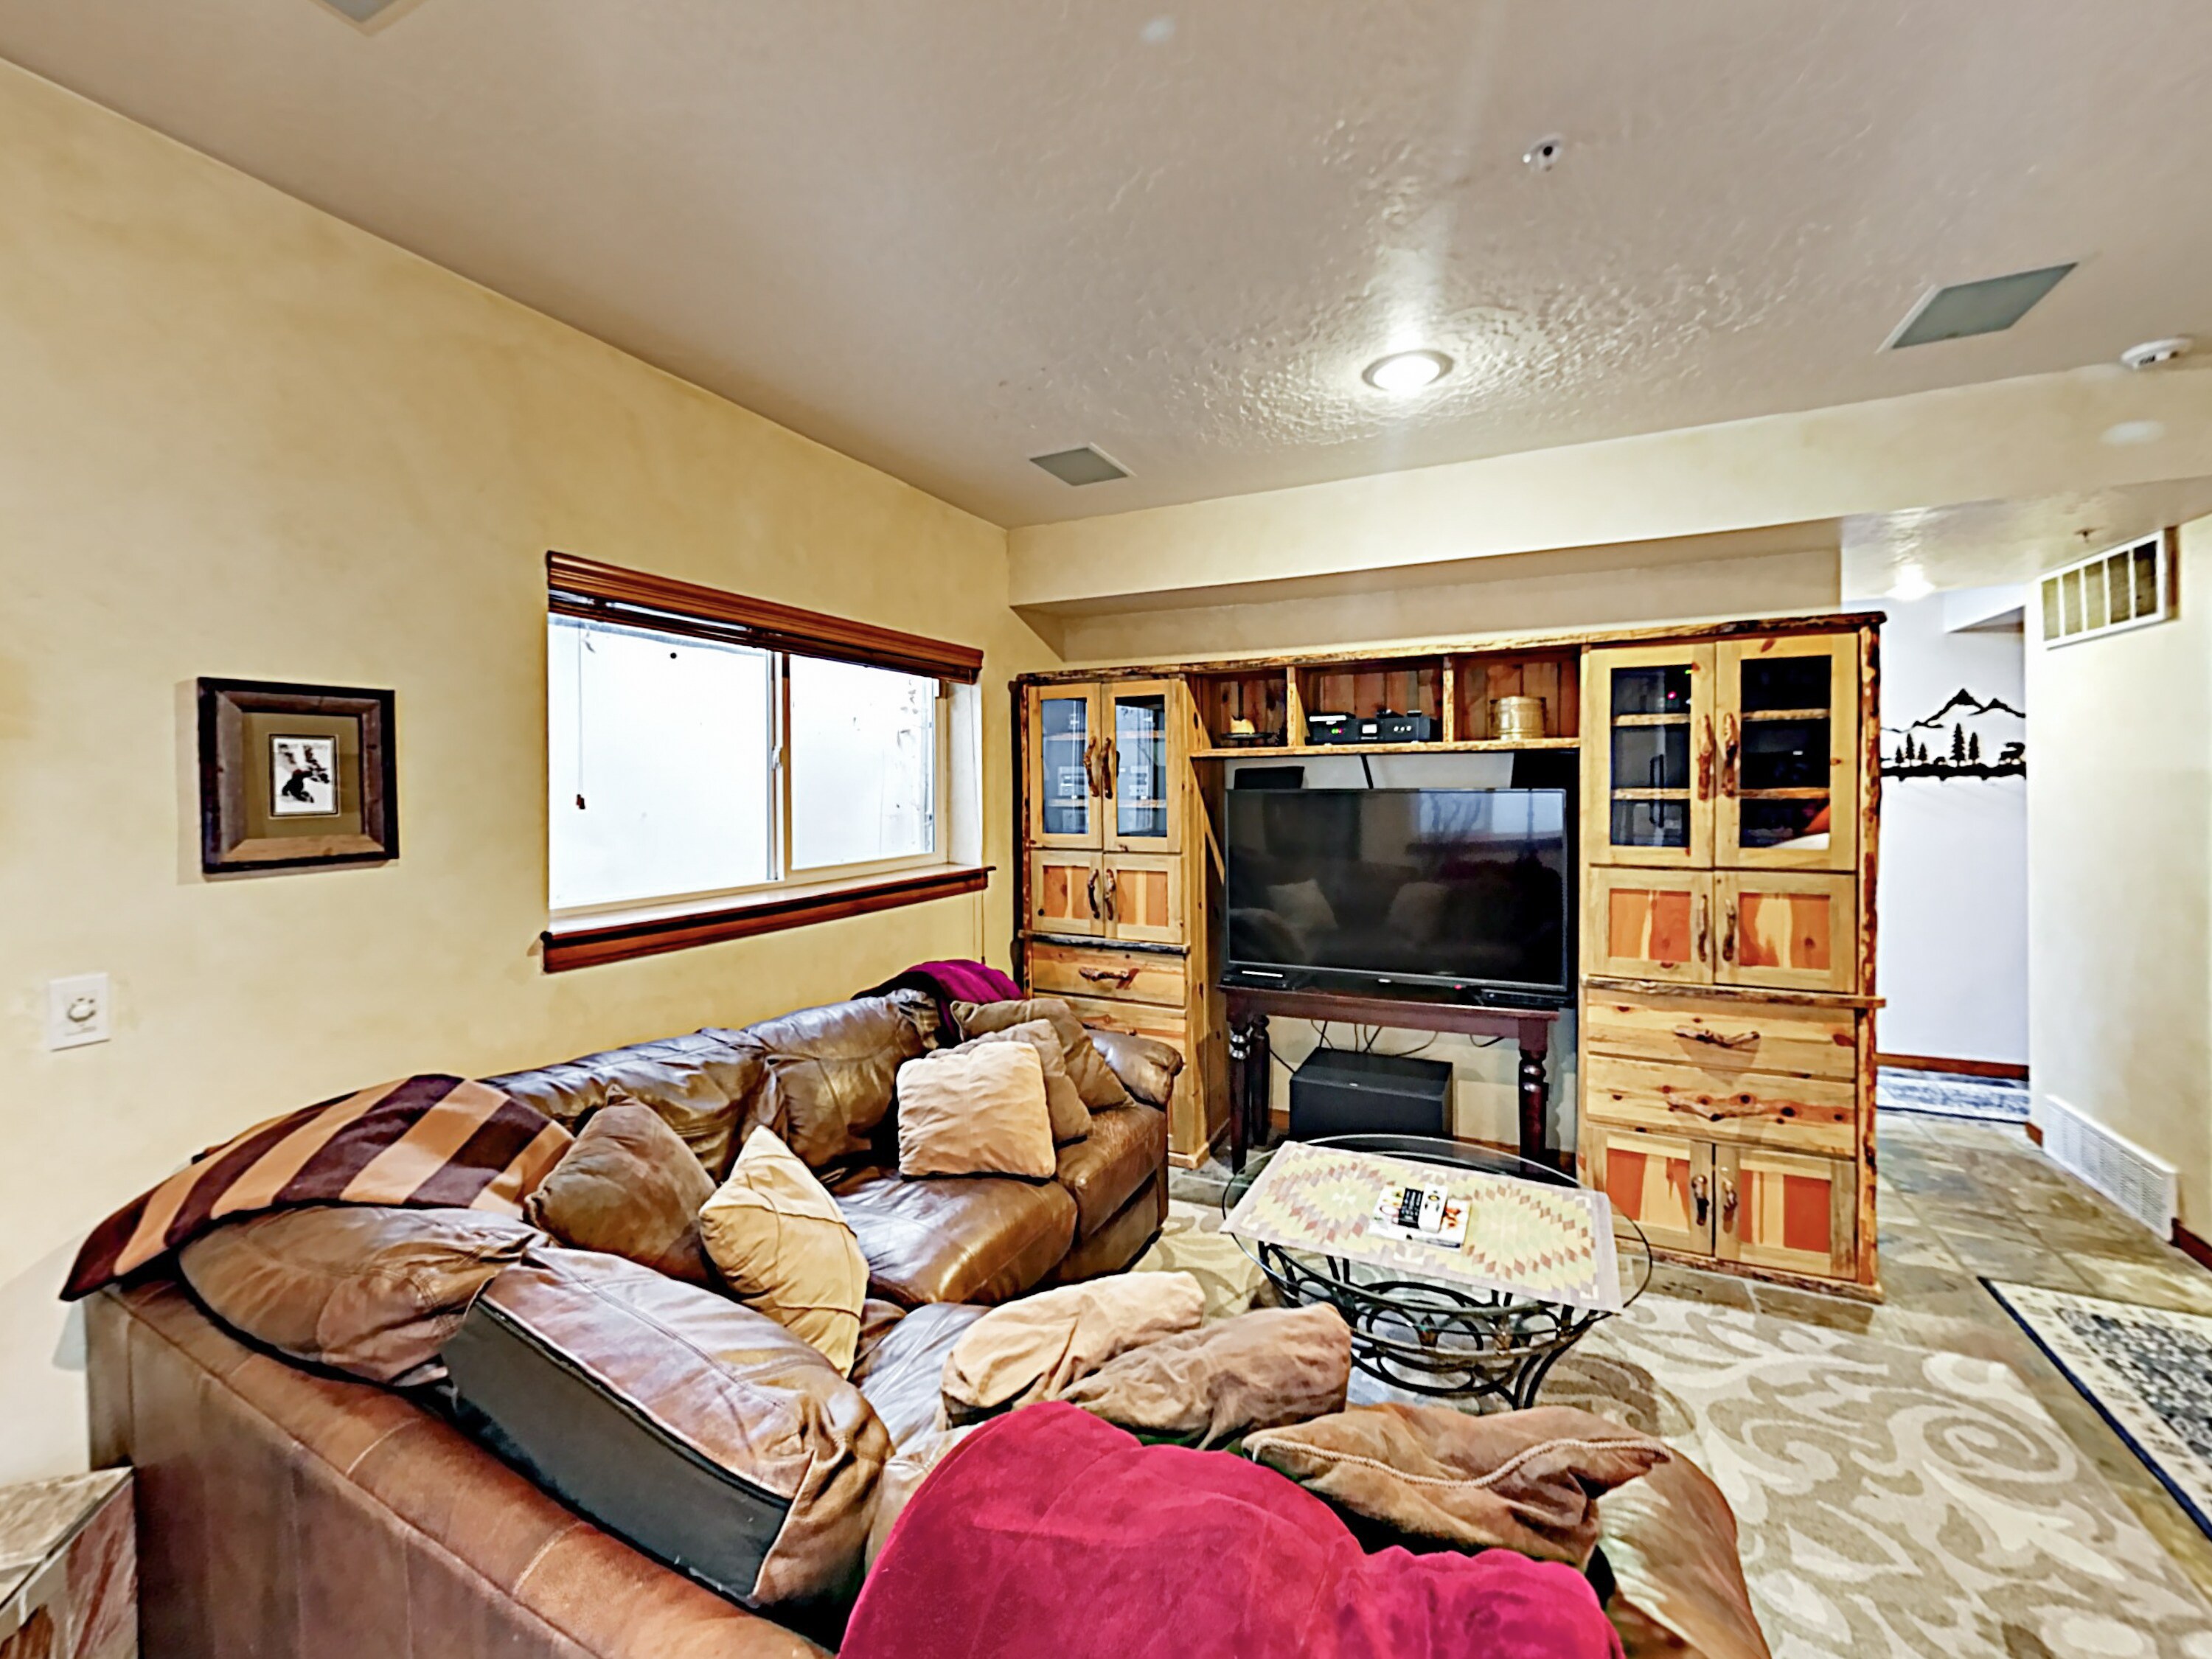 Enjoy movie nights in a 2nd living area with a comfy sectional and 55” TV with Blu-ray player.